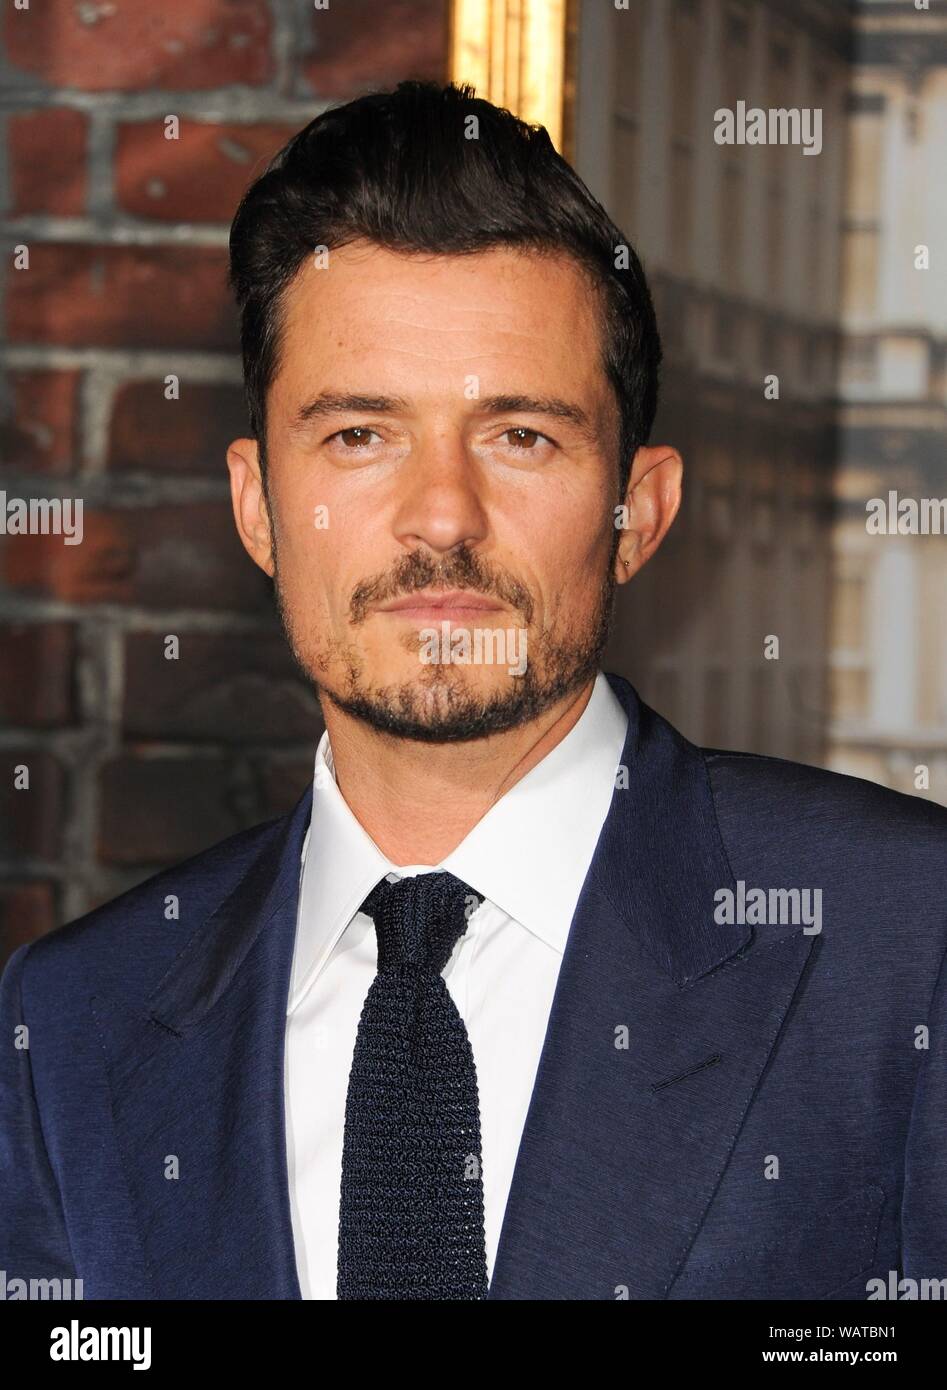 Los Angeles, CA. 21st Aug, 2019. Orlando Bloom at arrivals for CARNIVAL ROW Series Premiere on Amazon Prime, TCL Chinese Theatre (formerly Grauman's), Los Angeles, CA August 21, 2019. Credit: Elizabeth Goodenough/Everett Collection/Alamy Live News Stock Photo